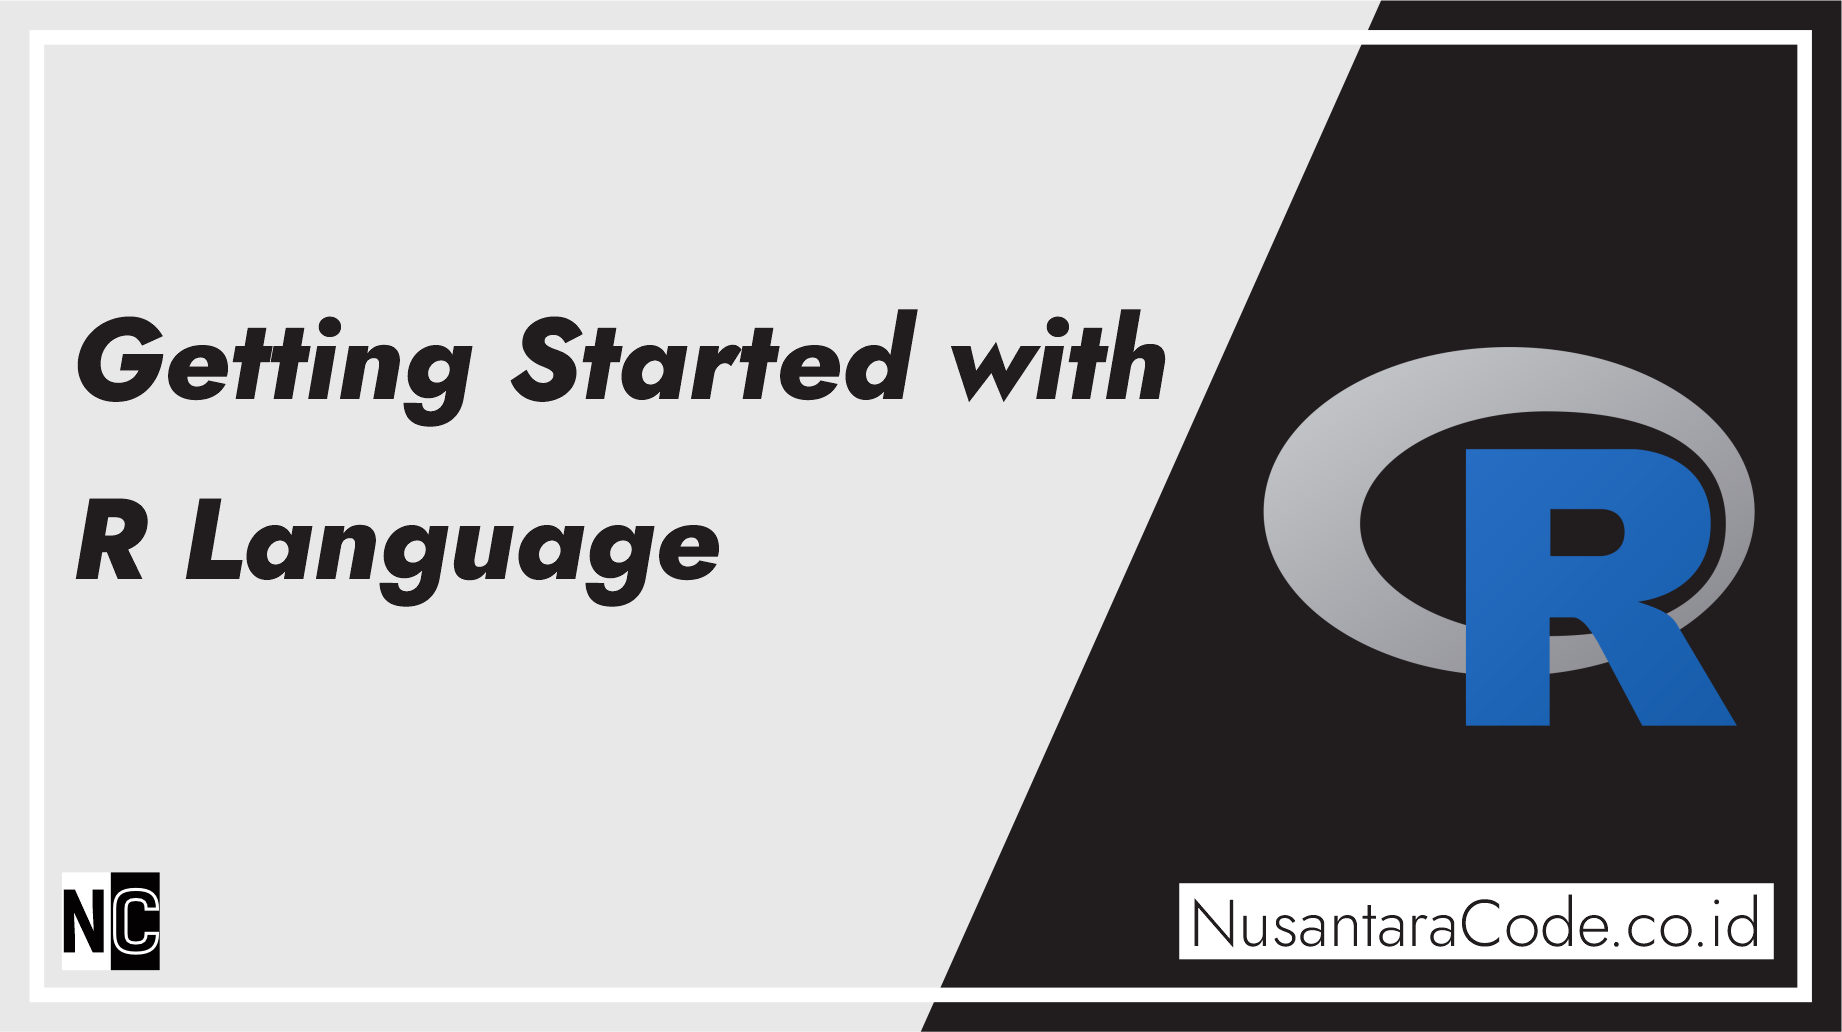 Getting Started with R Language